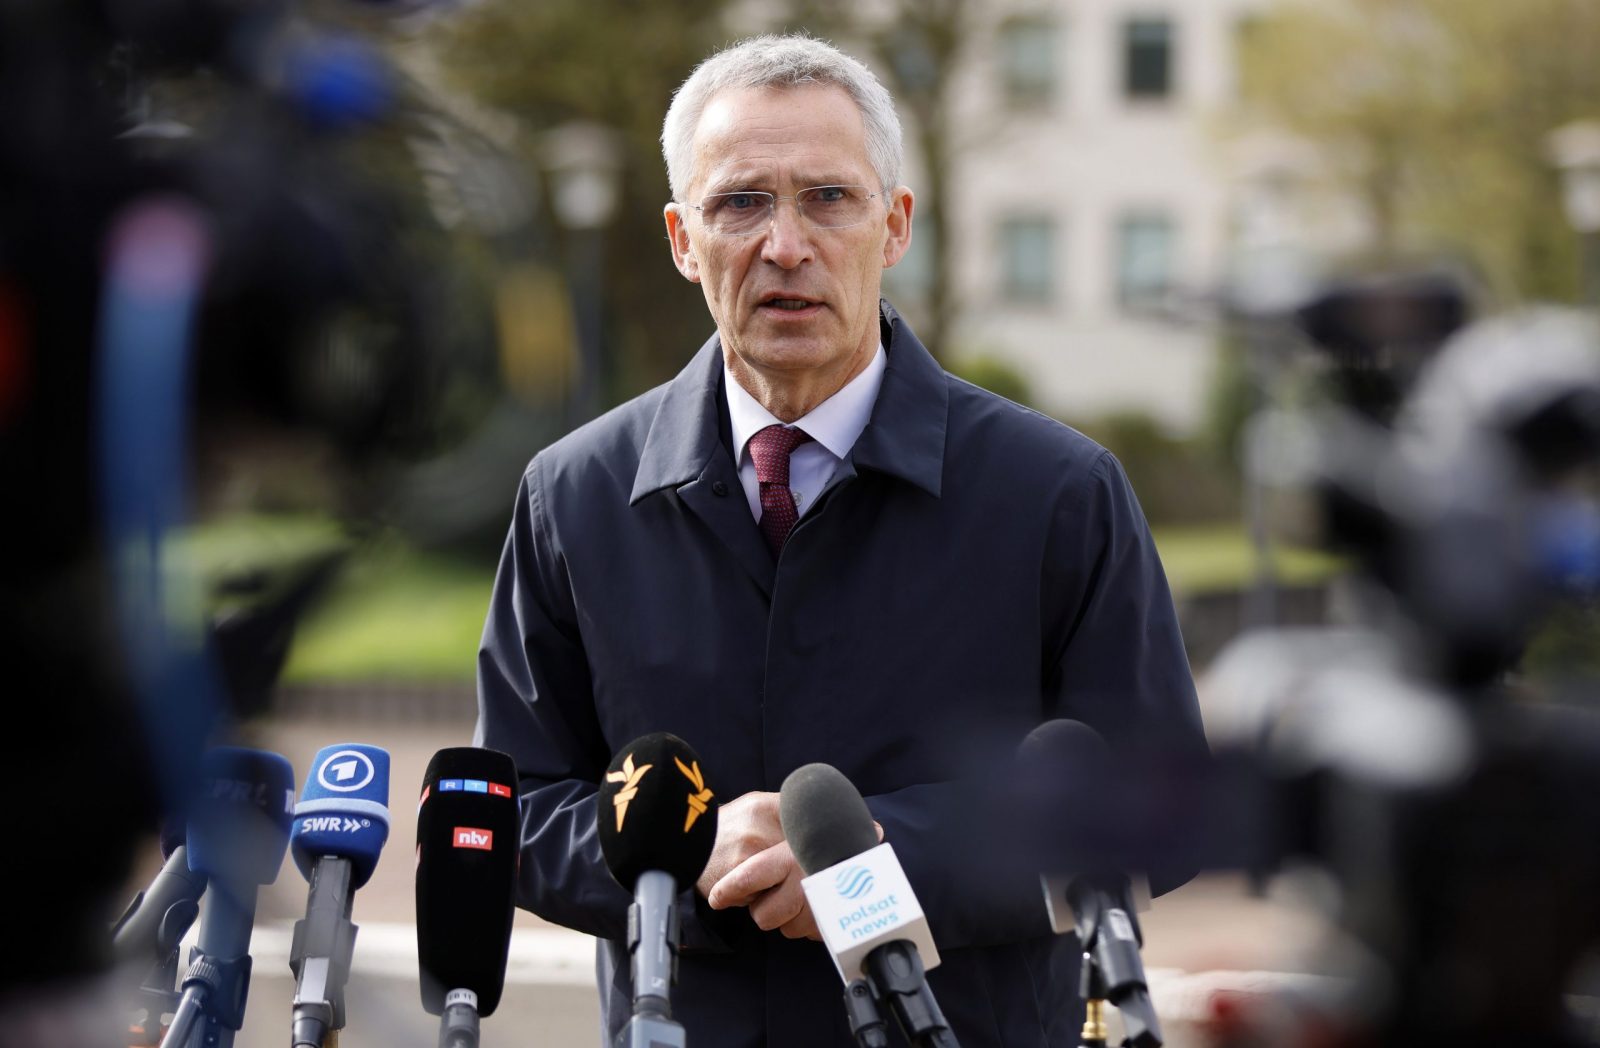 epa10583641 NATO Secretary General Jens Stoltenberg speaks to the media before the fourth meeting of Ukraine Defense Contact Group at the US Air Base in Ramstein, Germany, 21 April 2023. The US Secretary of Defense has invited Ministers of Defense and senior military officials from around the world to Ramstein to discuss the ongoing crisis in Ukraine and various security issues facing US allies and partners.  EPA/RONALD WITTEK